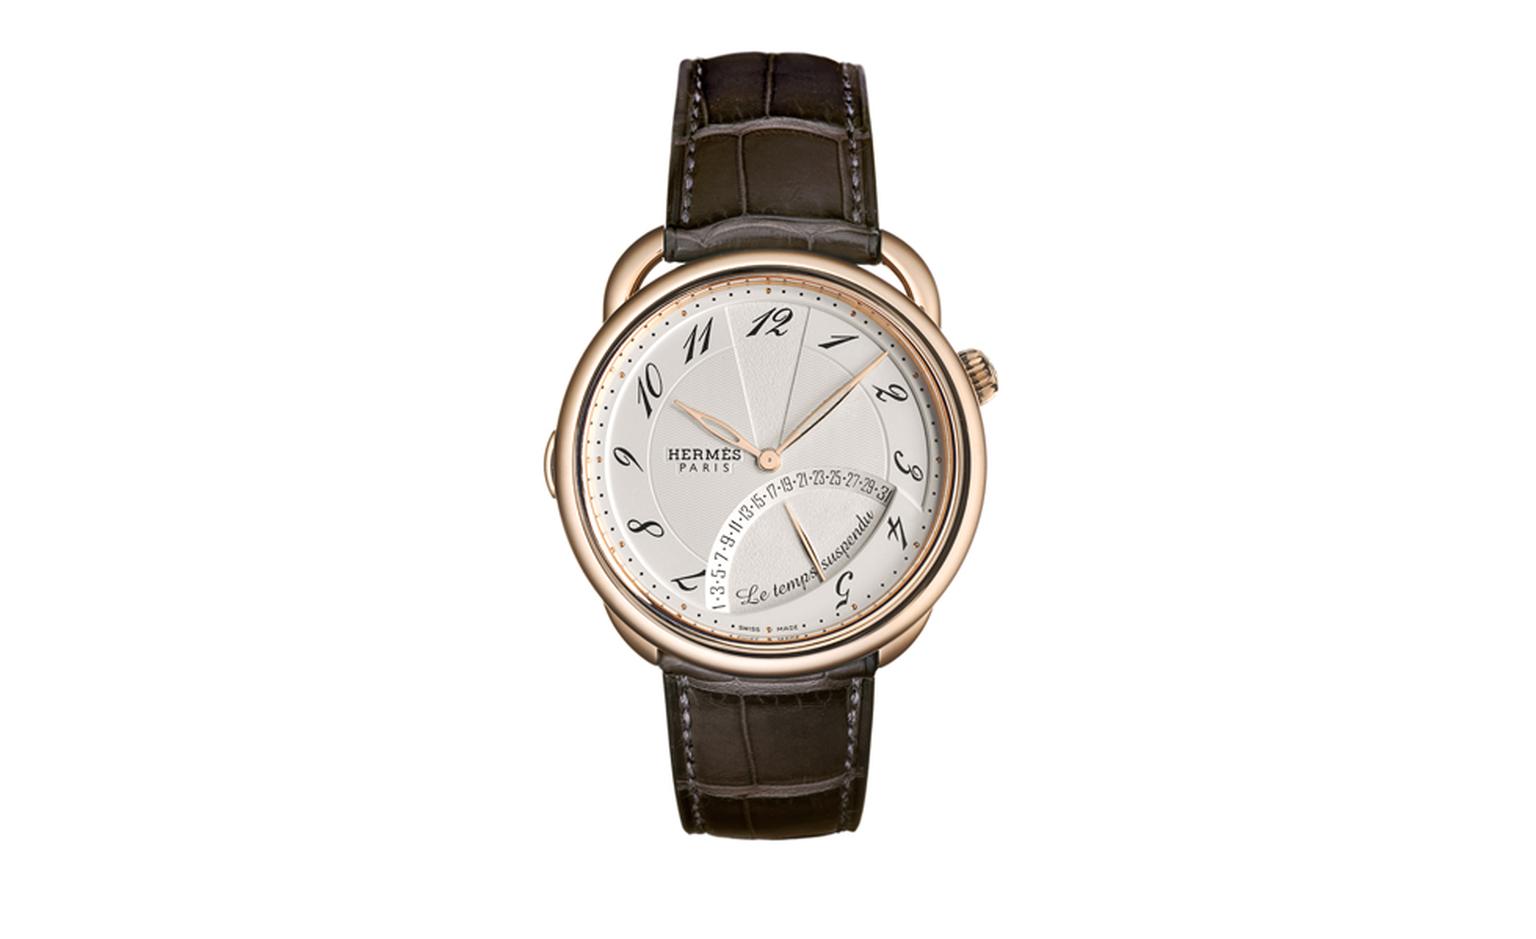 HERMES, Temps Suspendu is mechanical watch in rose gold with a brand new complication. Push the crown to suspend time at which point the two hands will sit at 12  o'clock until the crown is pushed again to resume timekeeping function.